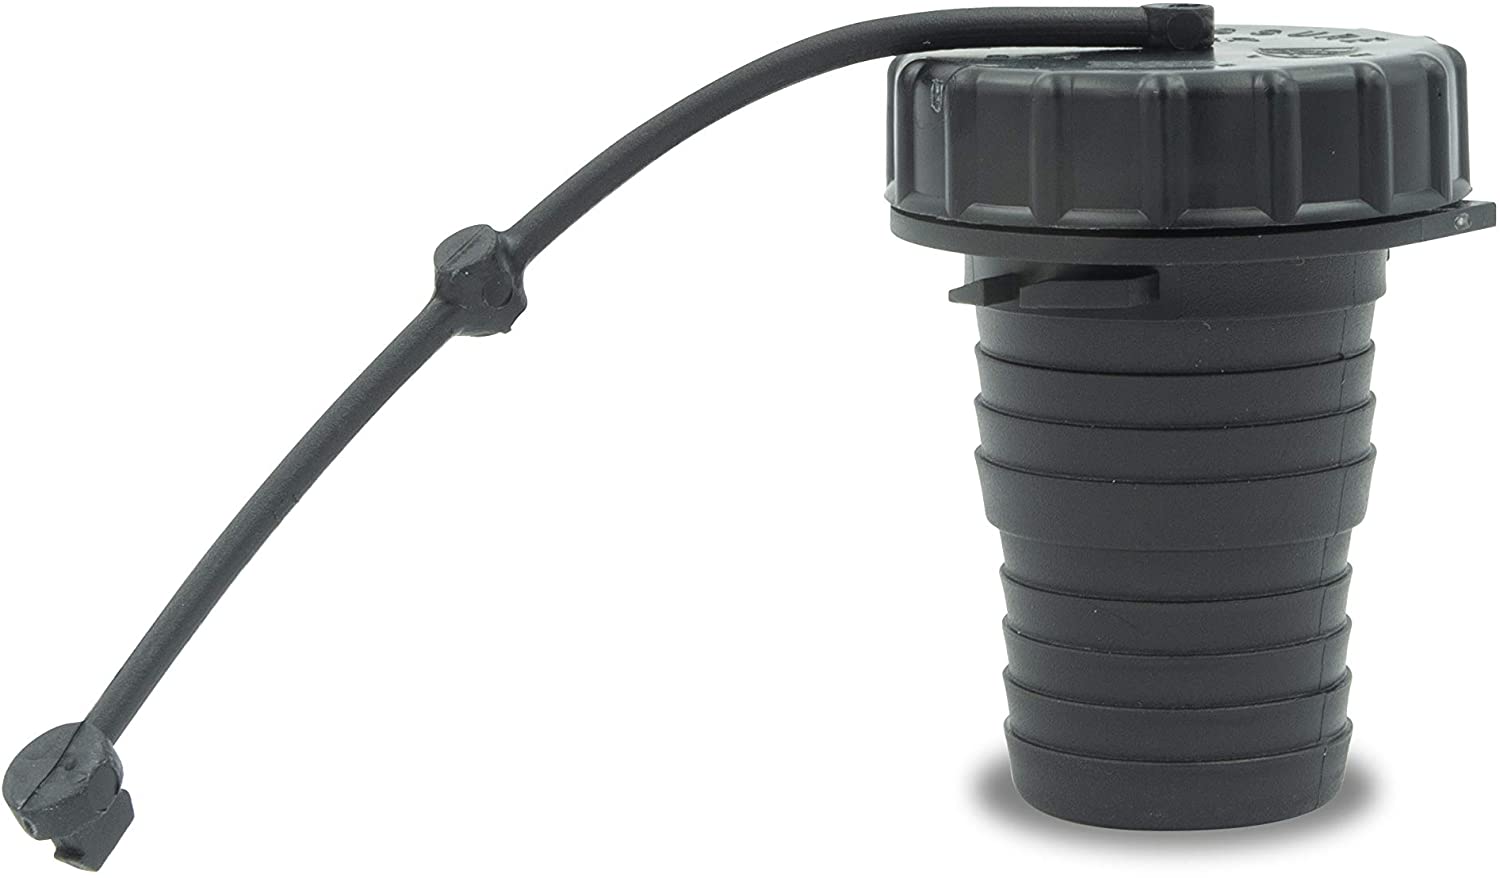 Thetford 94246 Replacement Cap, Strap, And Spout For Black Gravity Water Fill